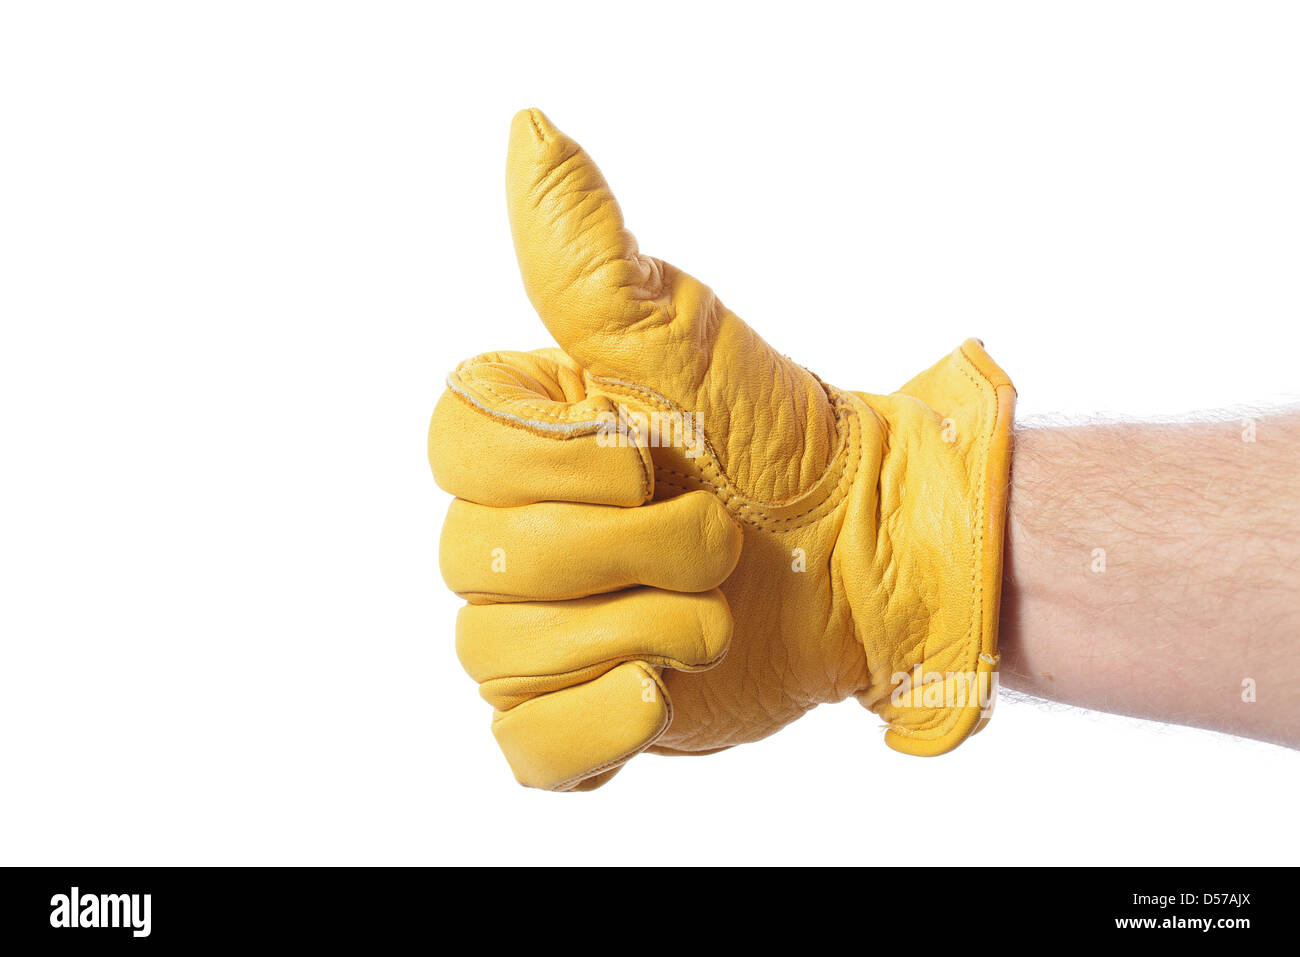 Construction Worker glove Thumbs up with copy space isolated on white Banque D'Images